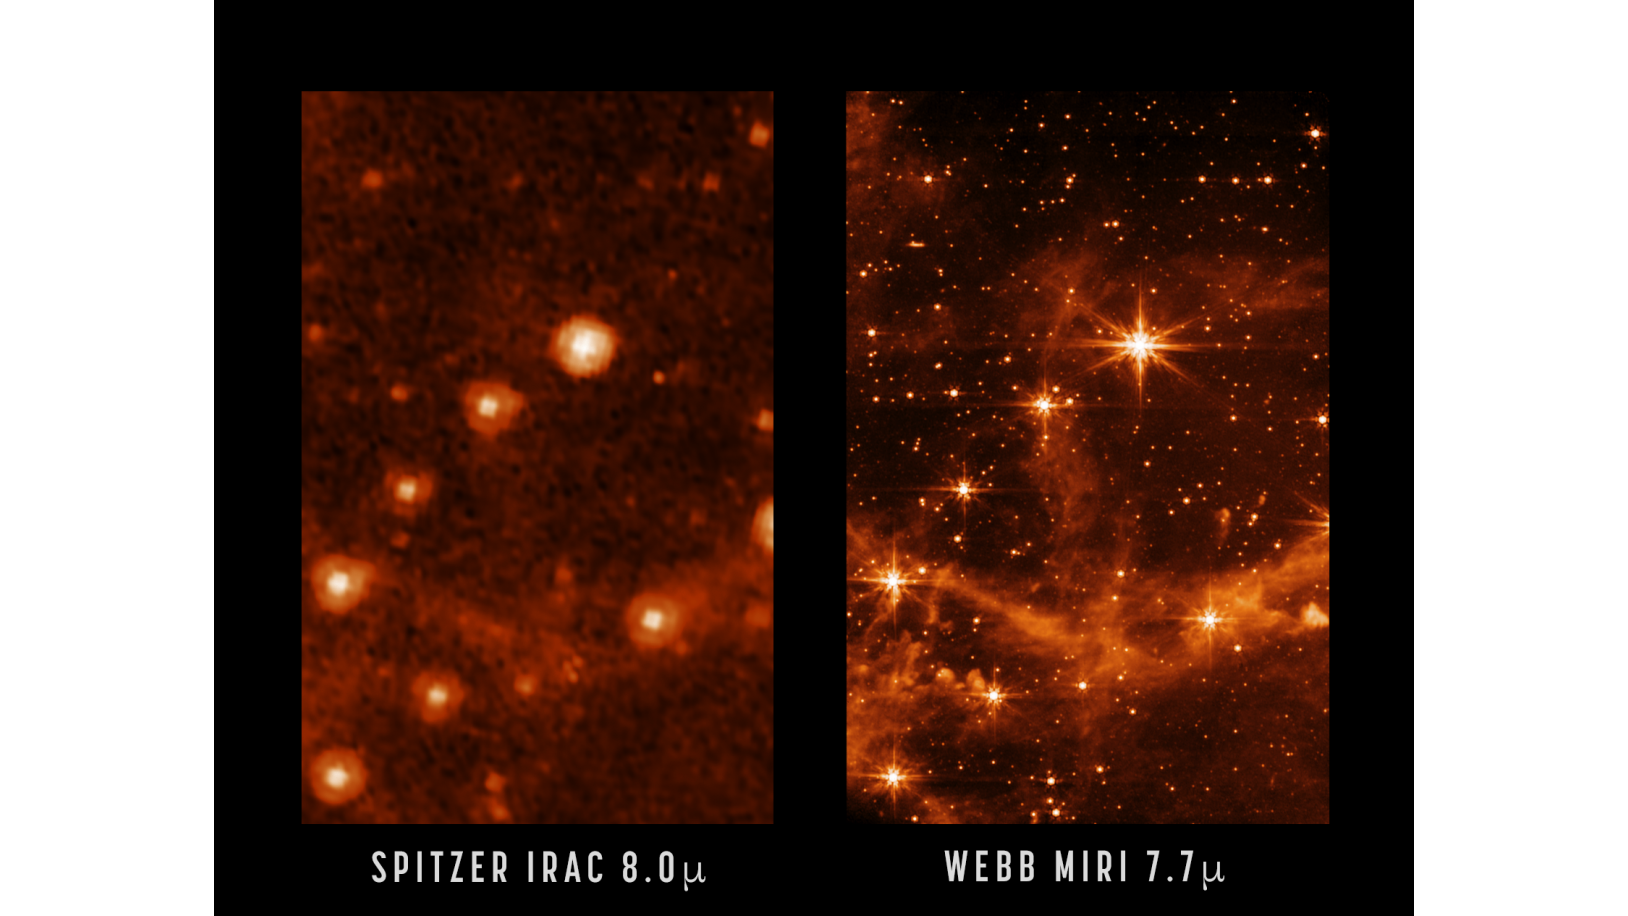 Spitzer and Webb compared